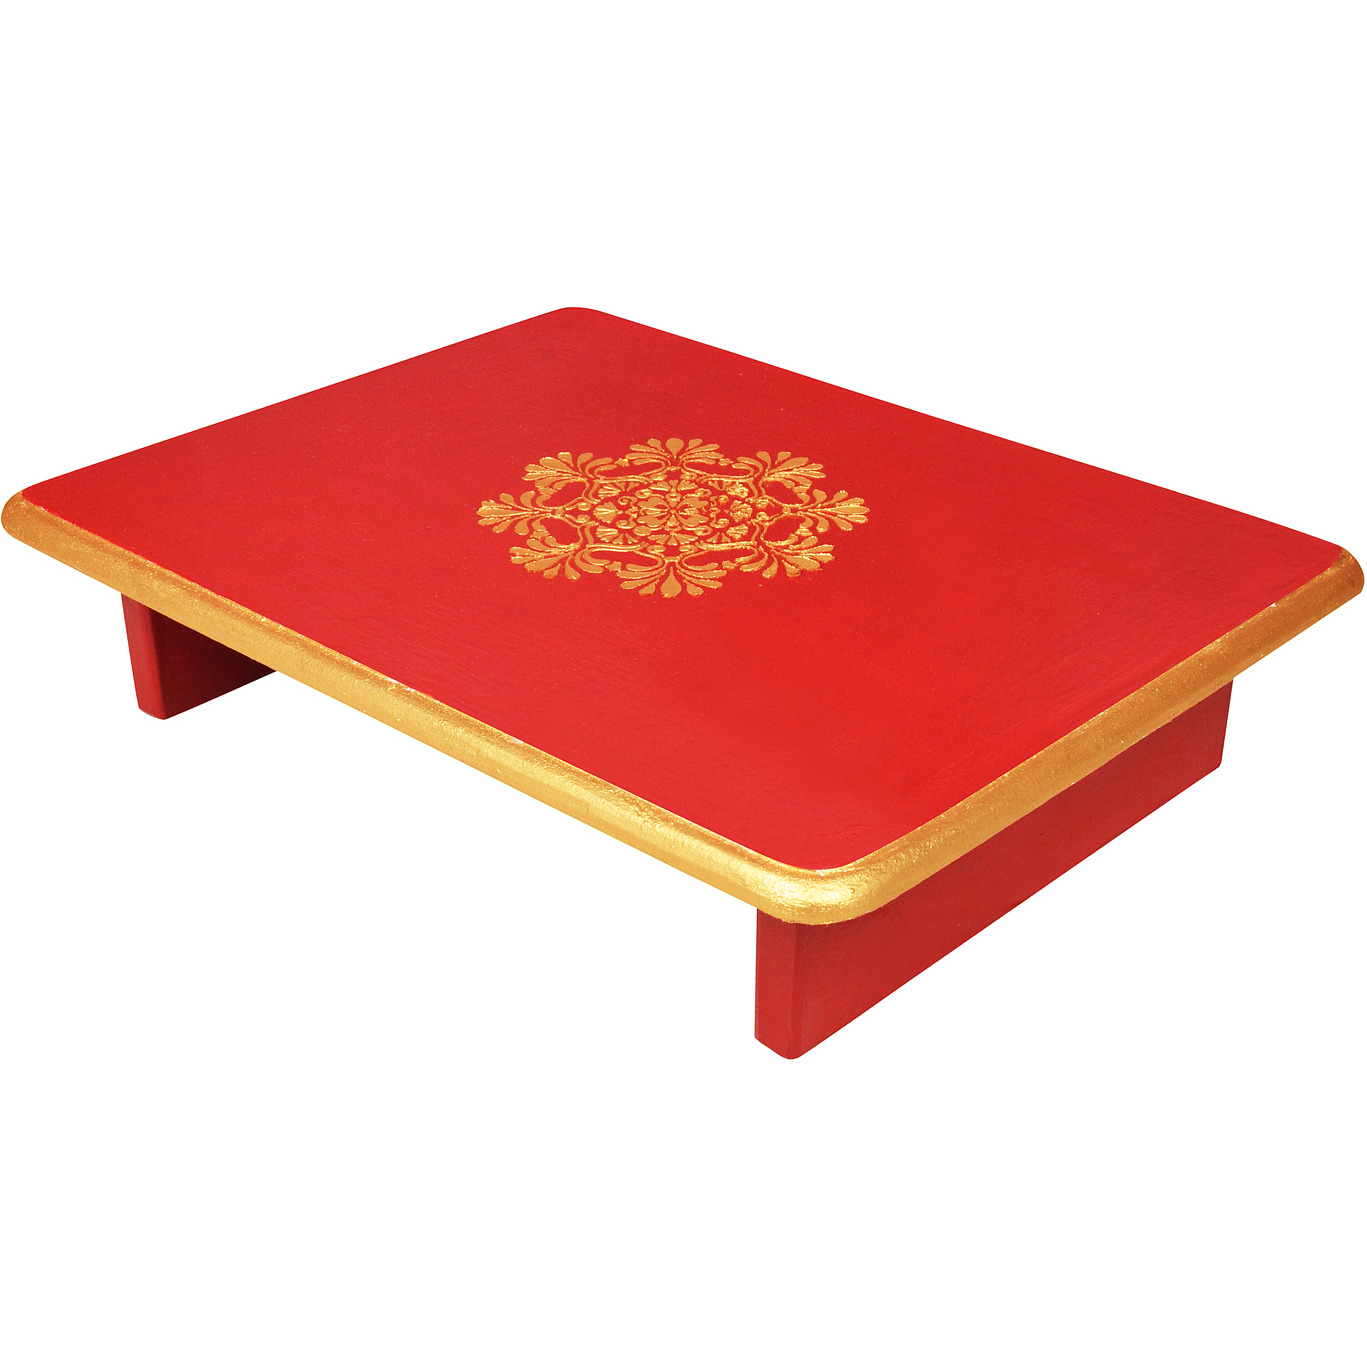 Handmade Wooden Red Temple D??cor Diwali Navratri Puja Chowki End Table (Color: Red)